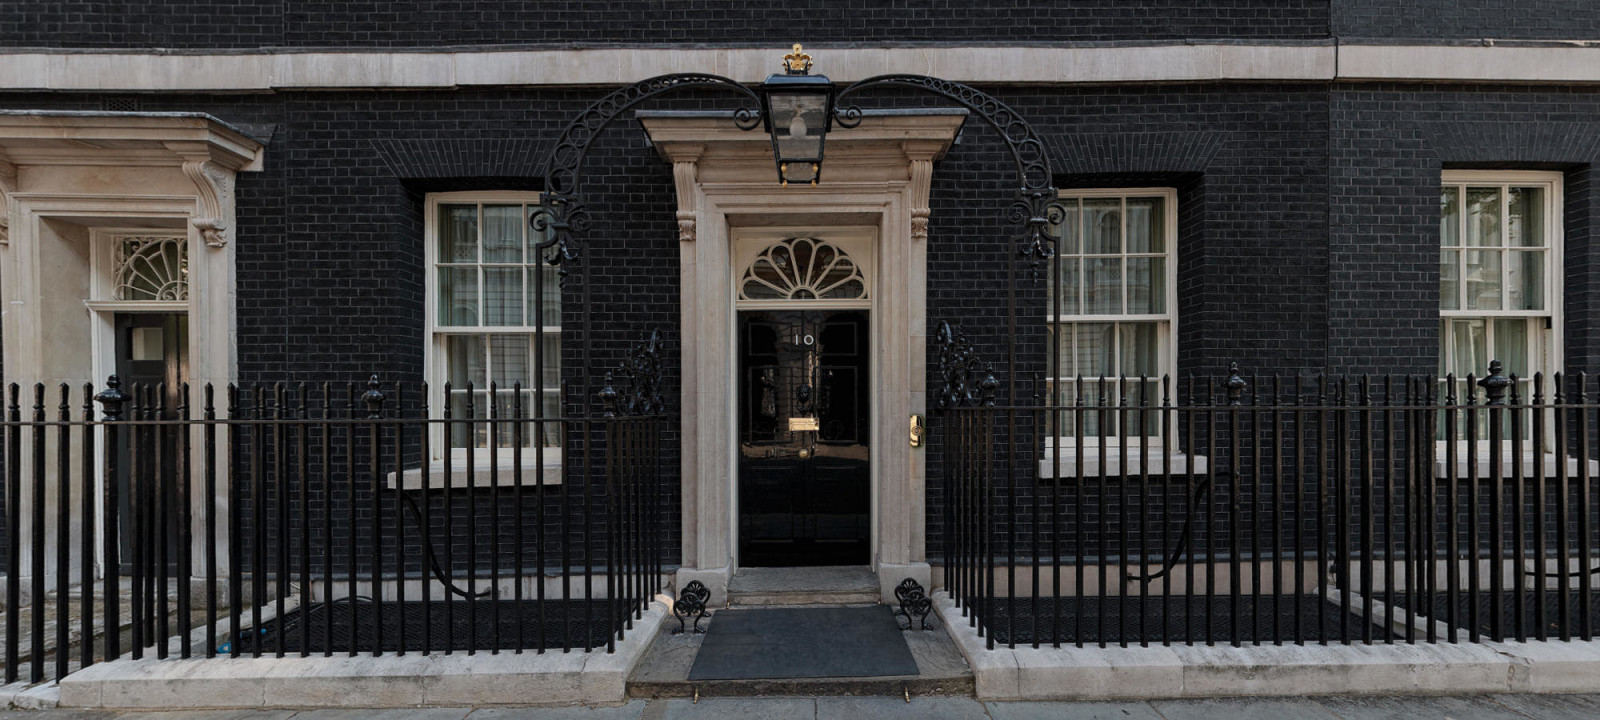 No 10 plans to give daily updates on Coronavirus